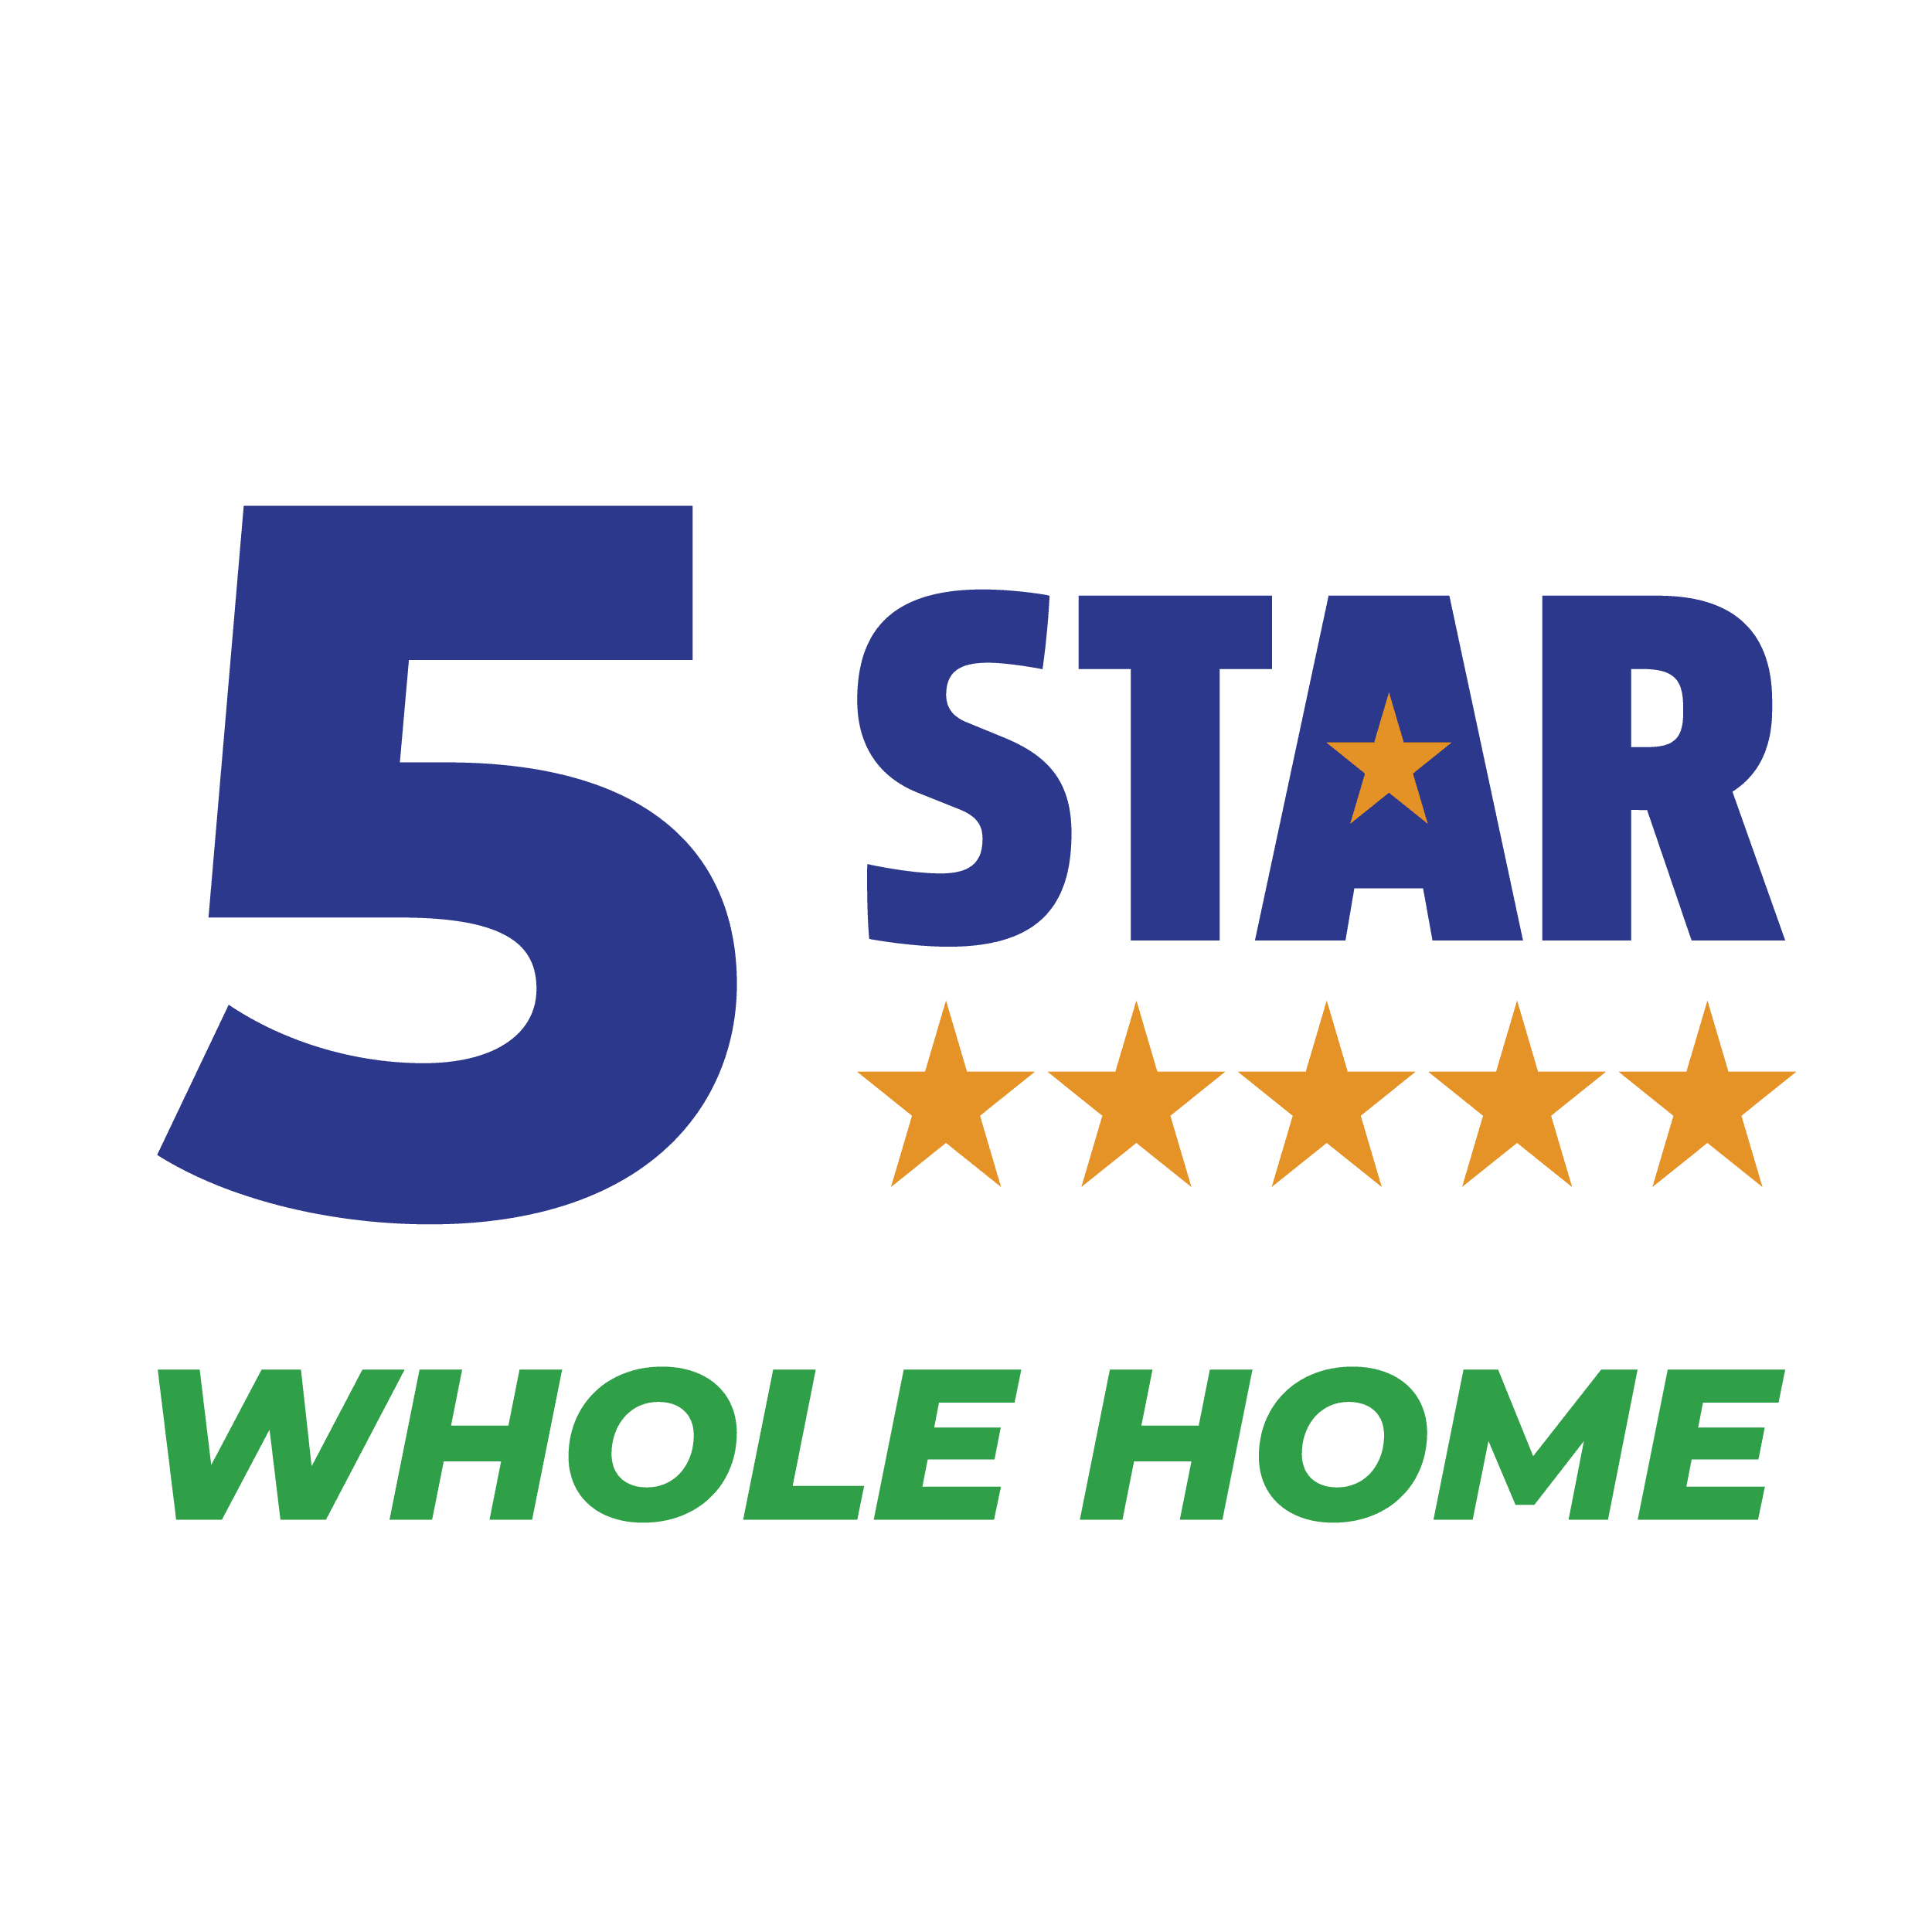 5-Star Whole Home